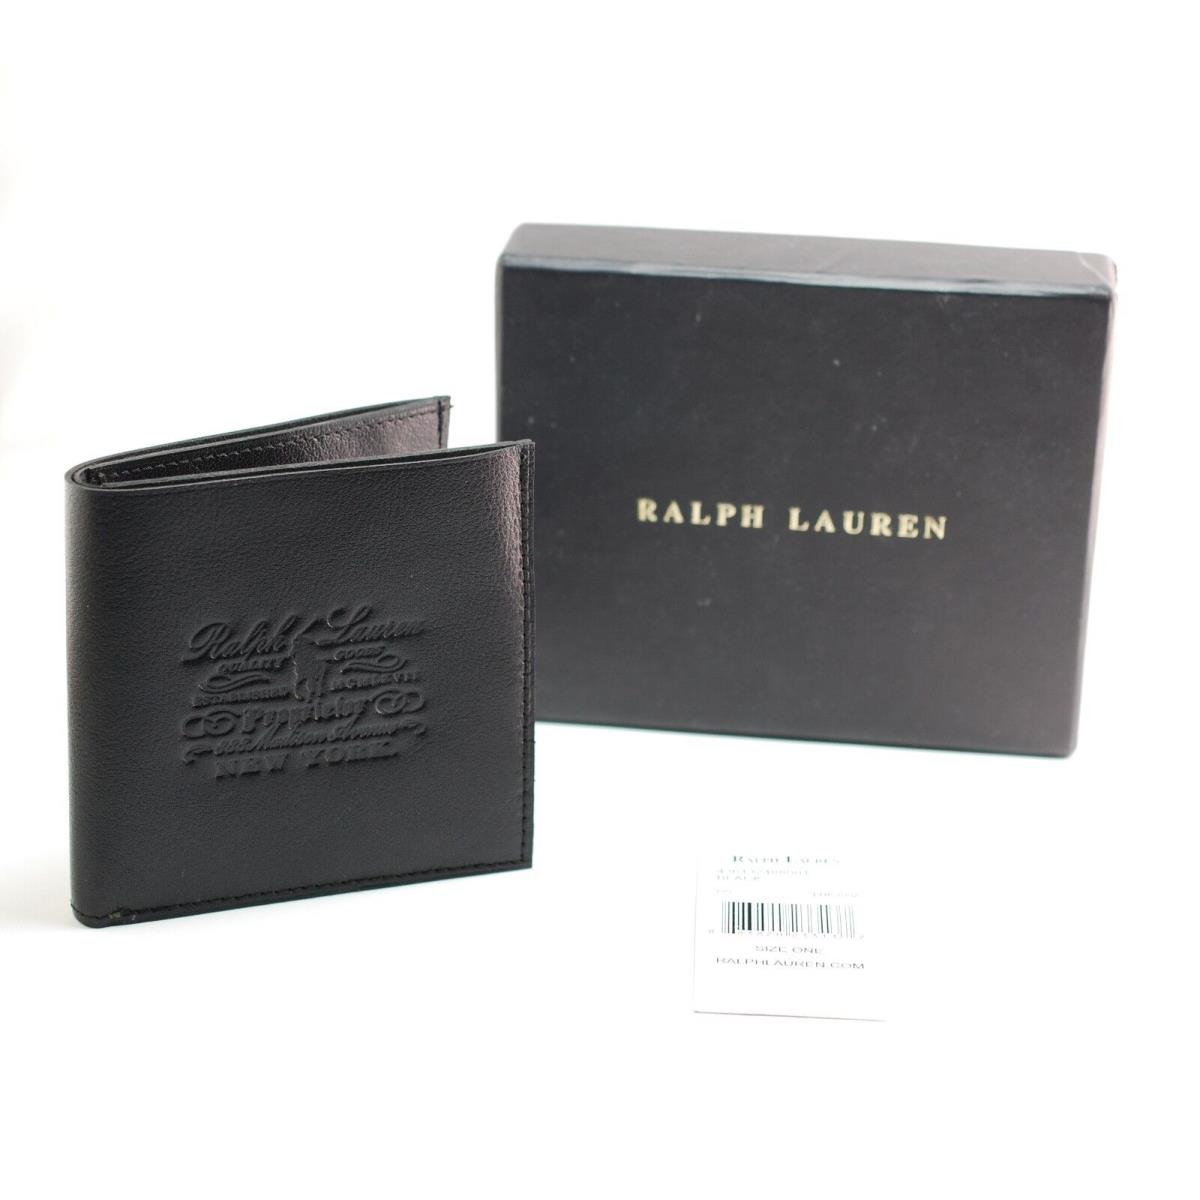 Ralph Lauren Rlpc Black All Leather 6-Card Bifold Wallet Made In Italy Rare